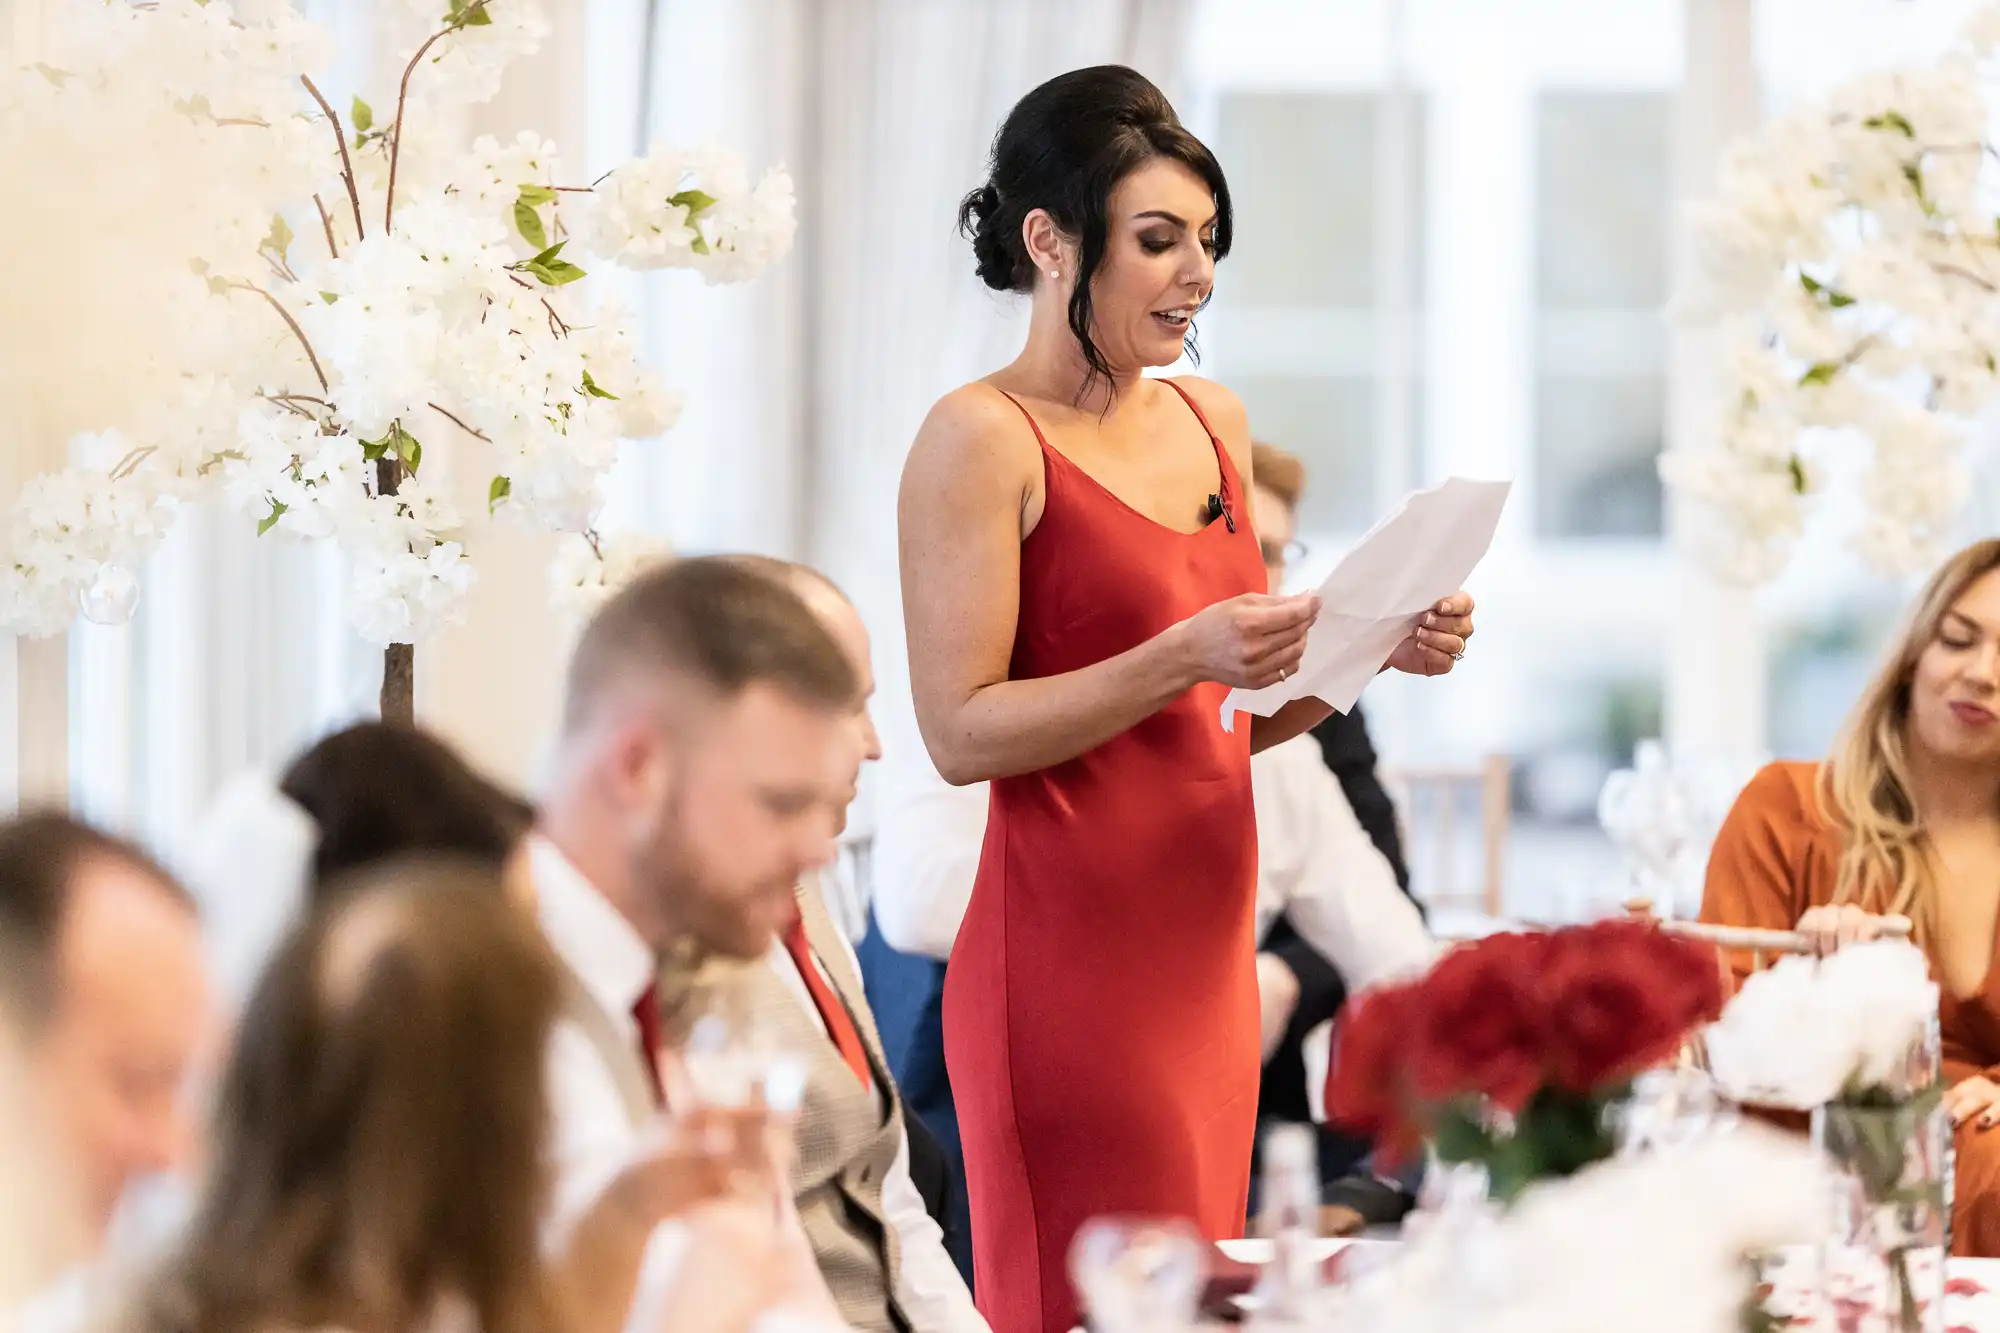 A woman in a red dress is giving a speech while standing among seated guests at a formal event decorated with white flowers.